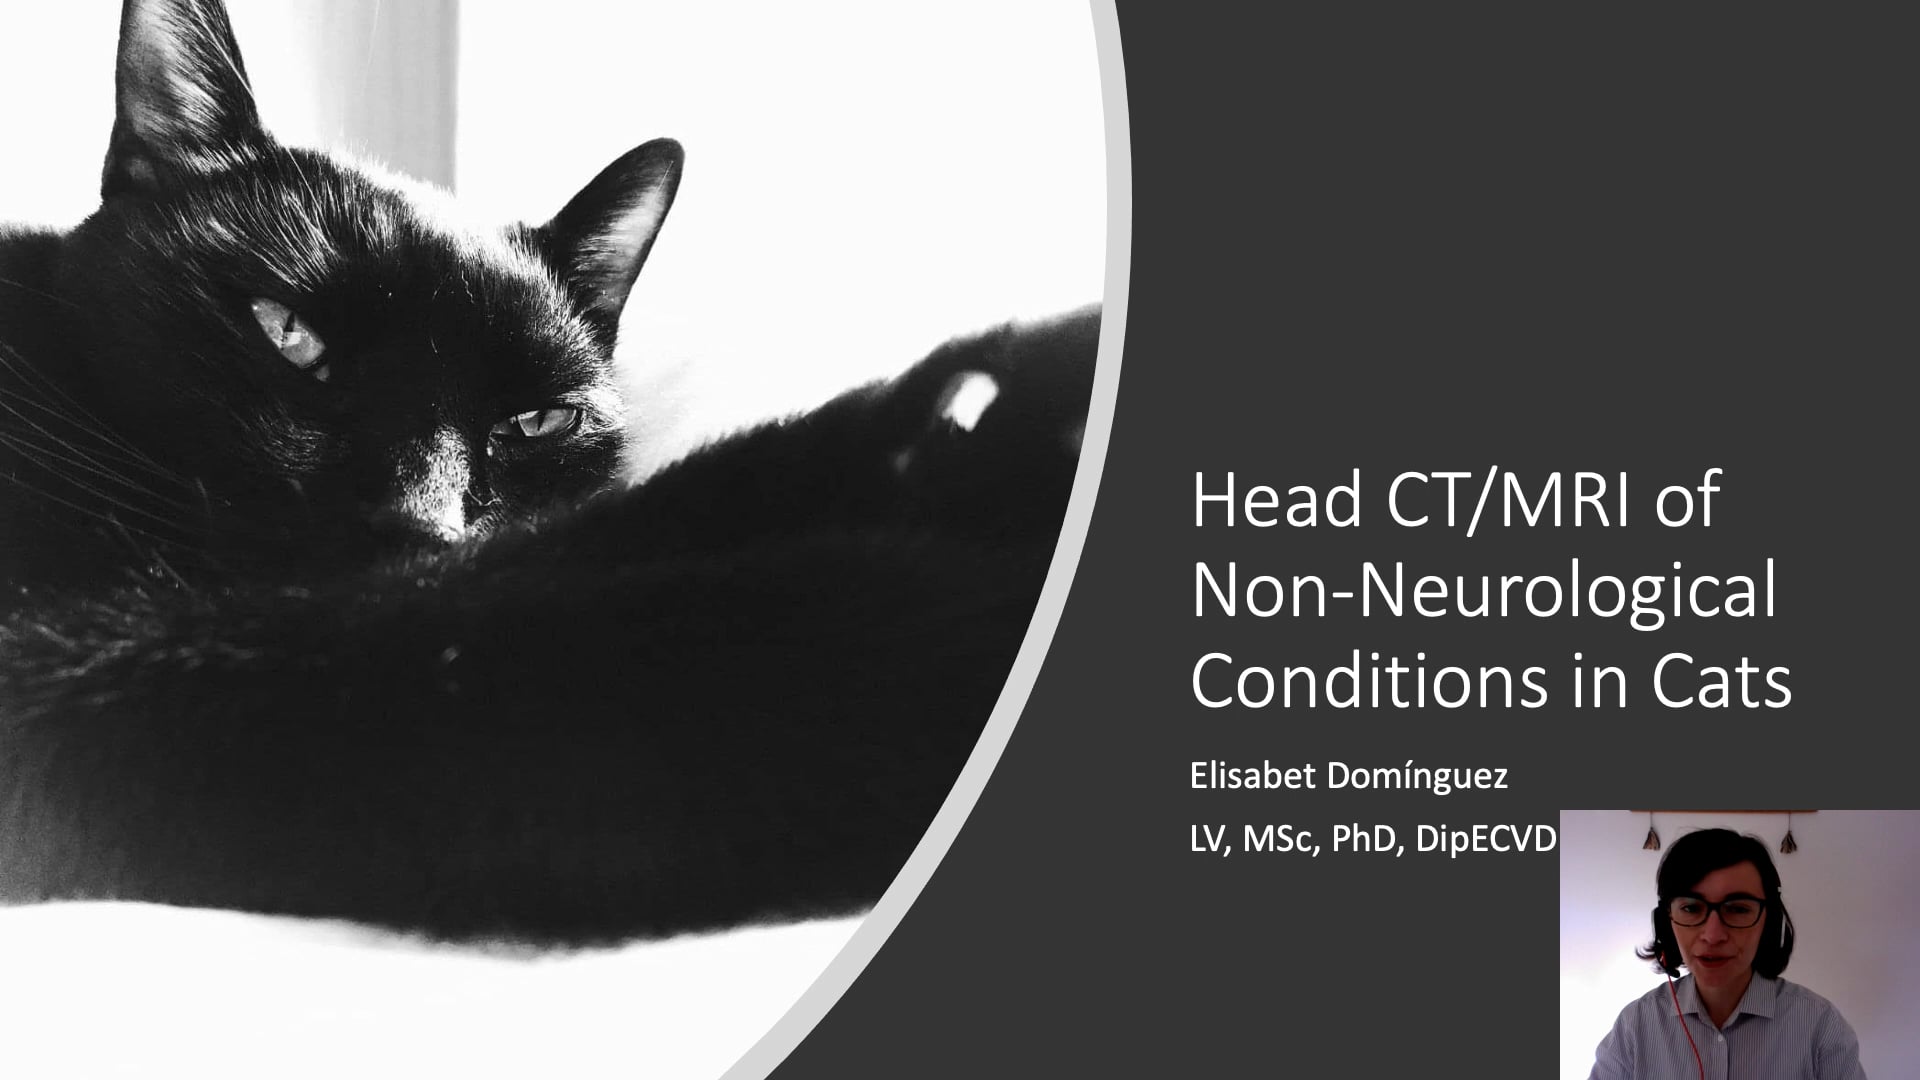 Head CT/MRI of Non-Neurological Conditions in Cats